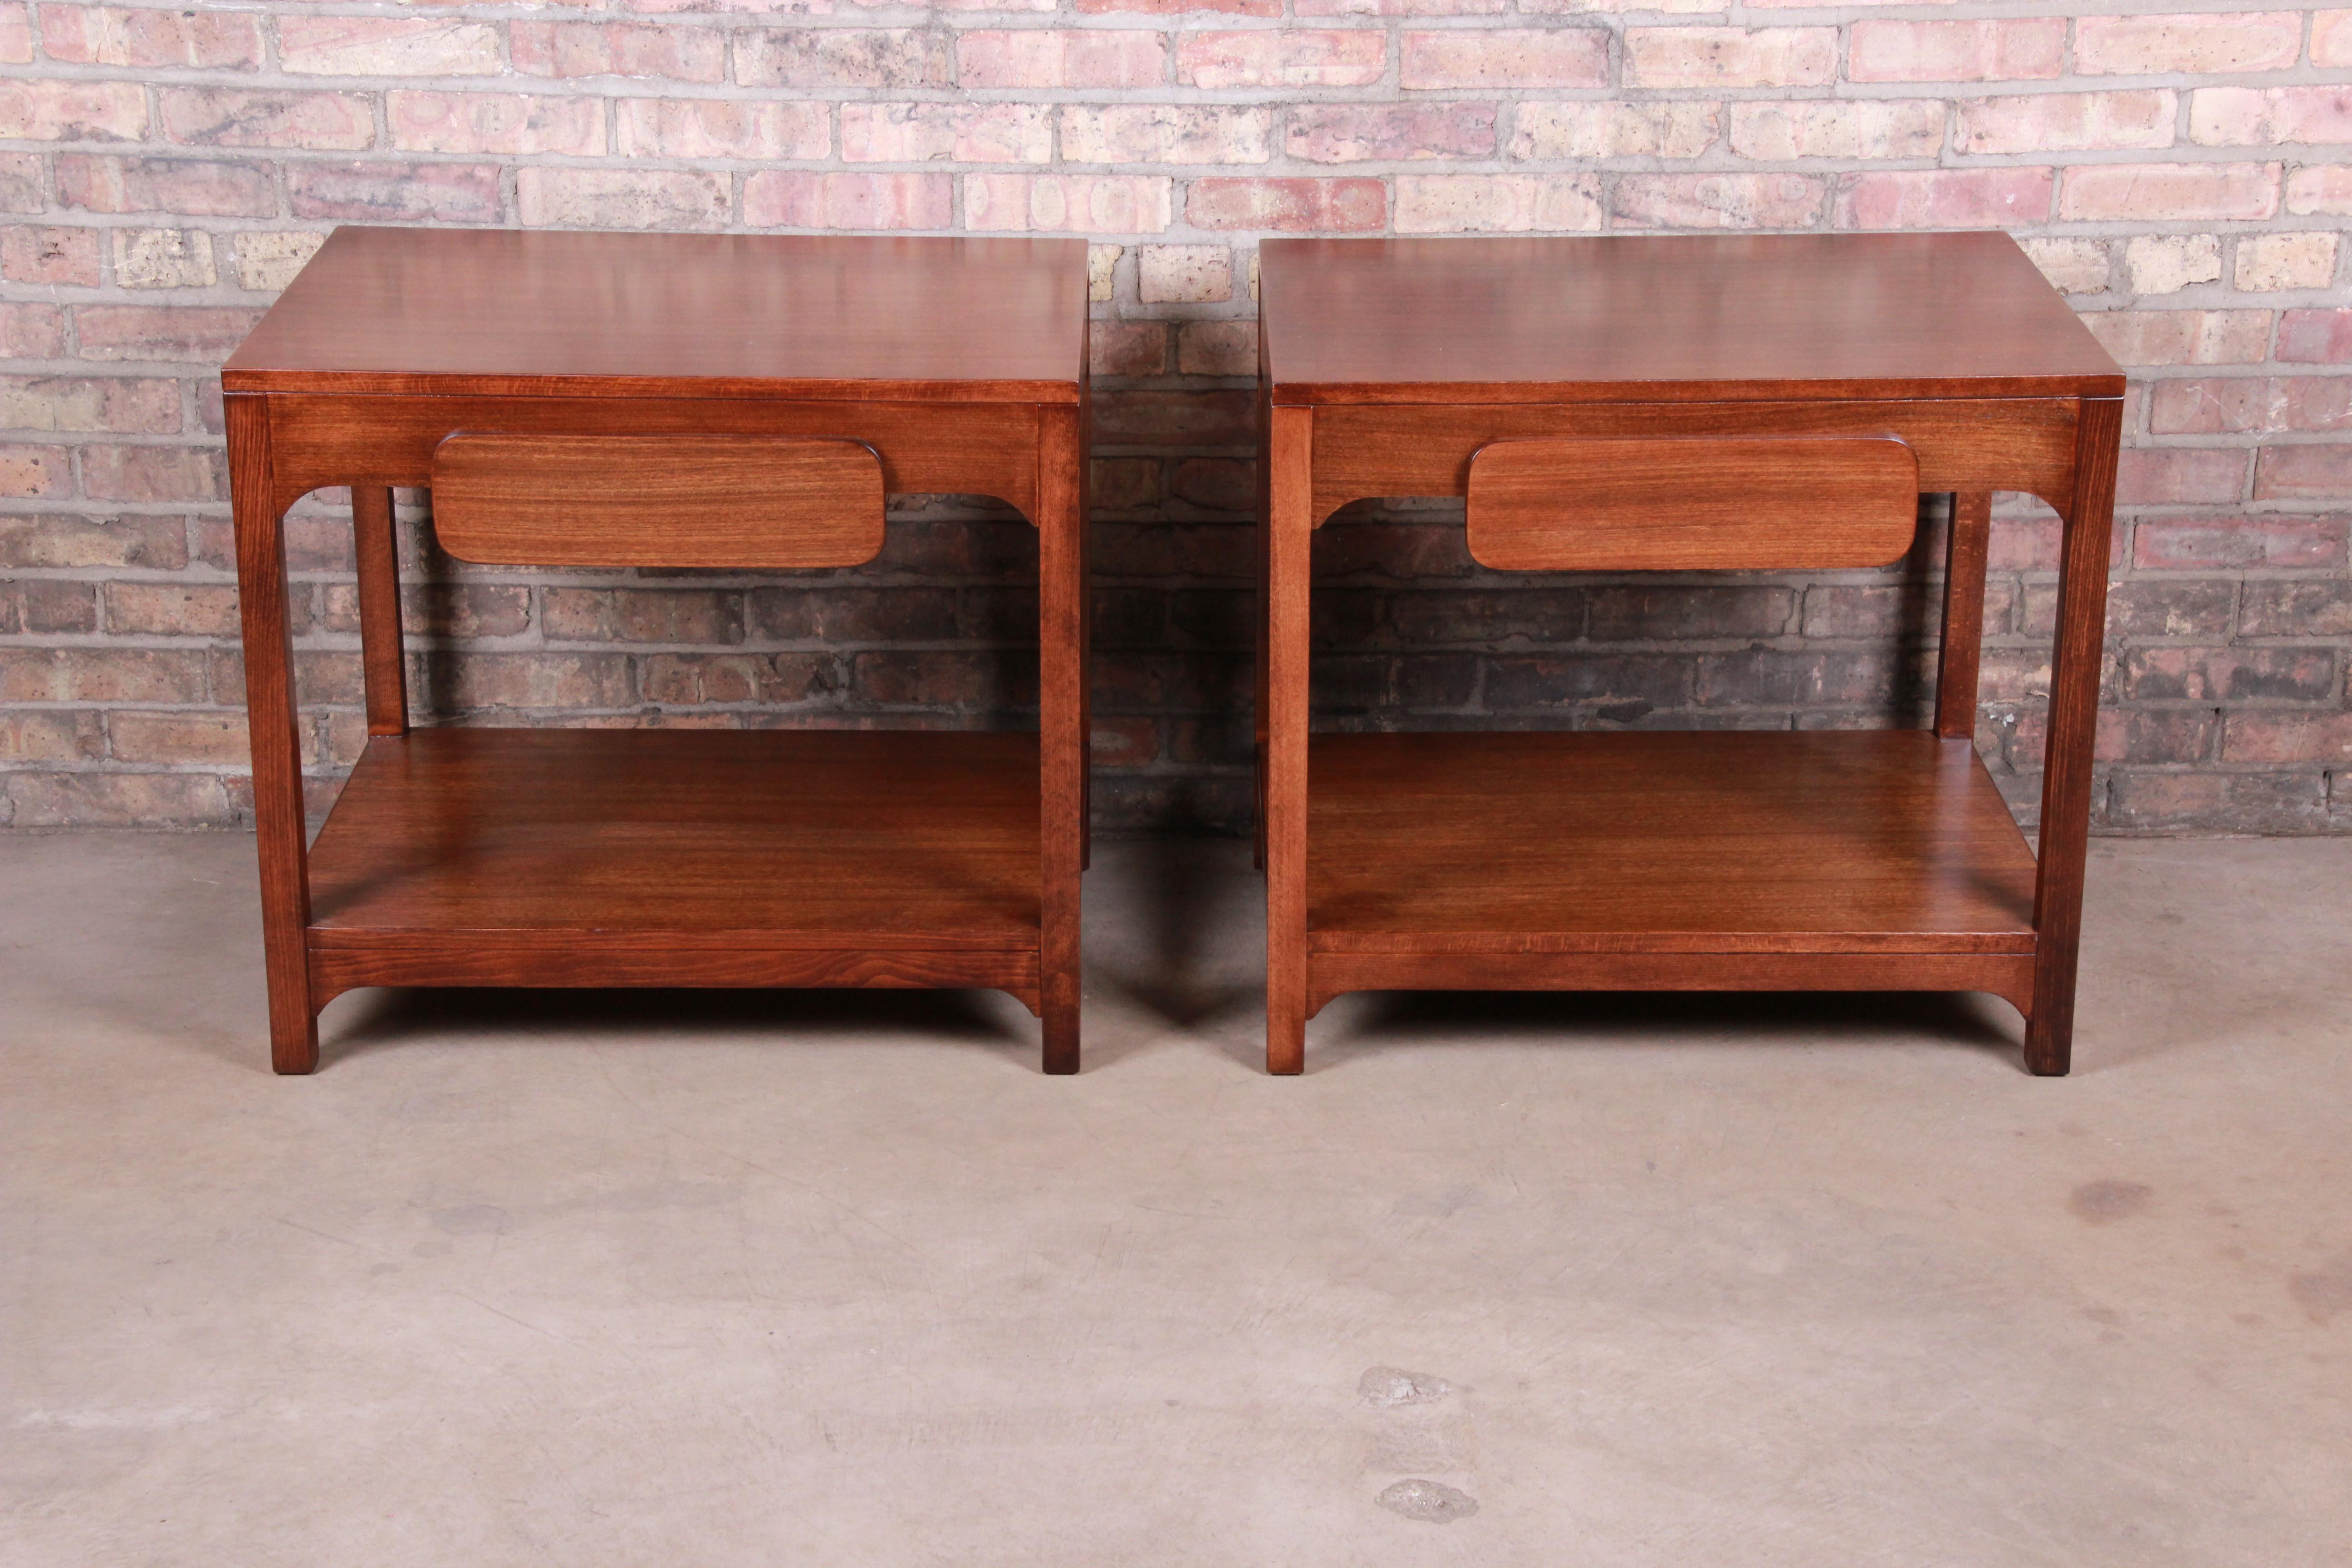 An exceptional pair of Mid-Century Modern elmwood nightstands or side tables

By Edward Wormley for Drexel 